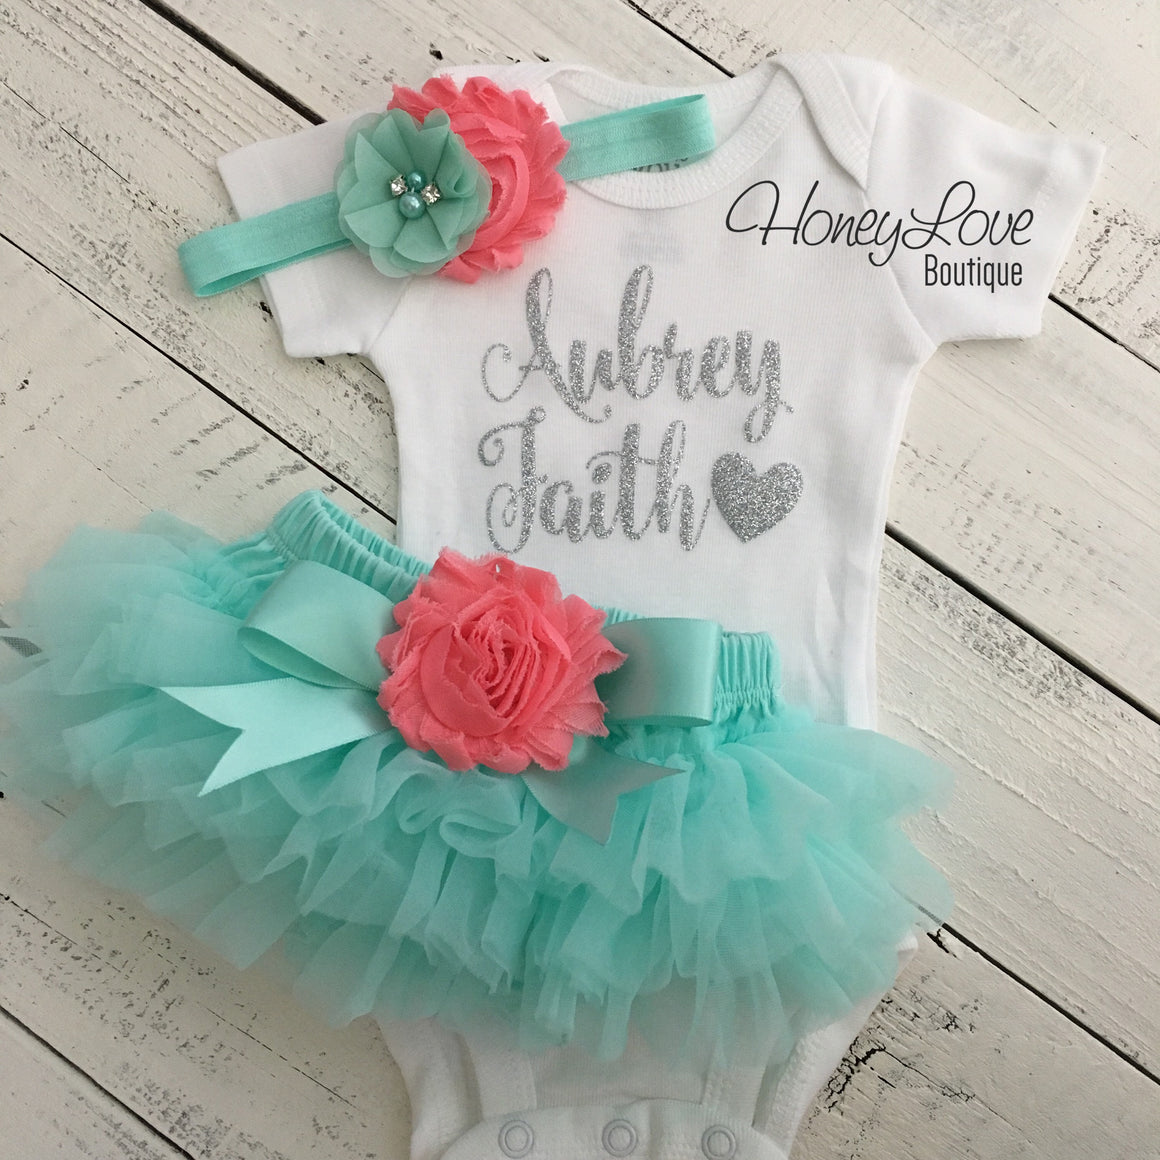 PERSONALIZED Name Outfit - Mint/Aqua and Silver Glitter - Coral flower embellished tutu skirt bloomers - HoneyLoveBoutique